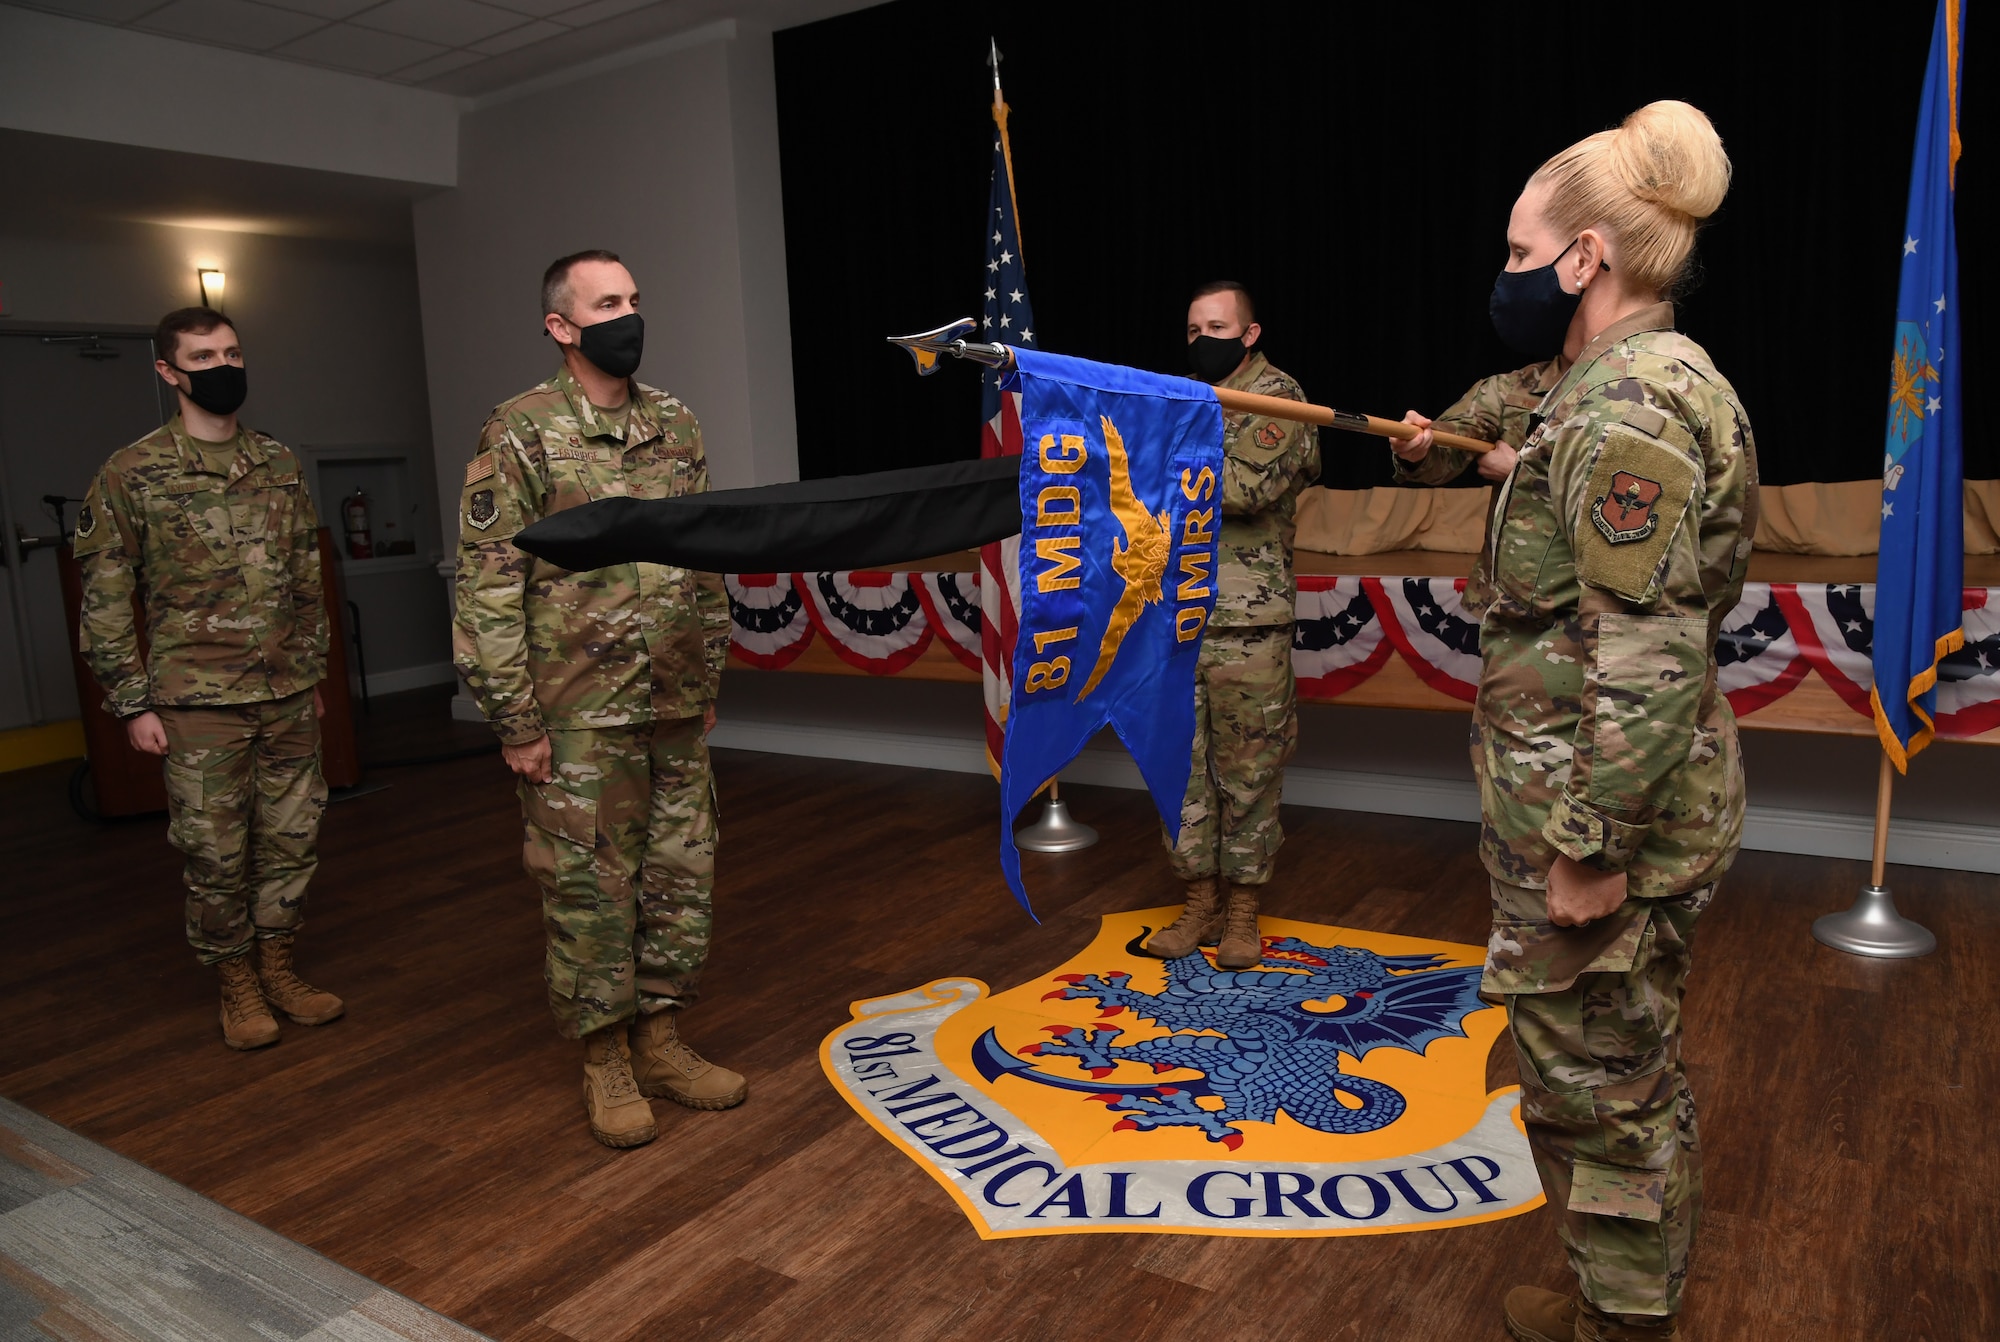 The 81st Operational Medical Readiness Squadron guidon is unfurled during a redesignation ceremony inside the Keesler Medical Center at Keesler Air Force Base, Mississippi, September 30, 2020. In an effort to meet Department of Defense policy to increase operational medical readiness and duty availability for active duty personnel, while continuing to ensure the delivery of high quality health care, the 81st OMRS replaced the 81st Aerospace Medicine Squadron. (U.S. Air Force photo by Kemberly Groue)